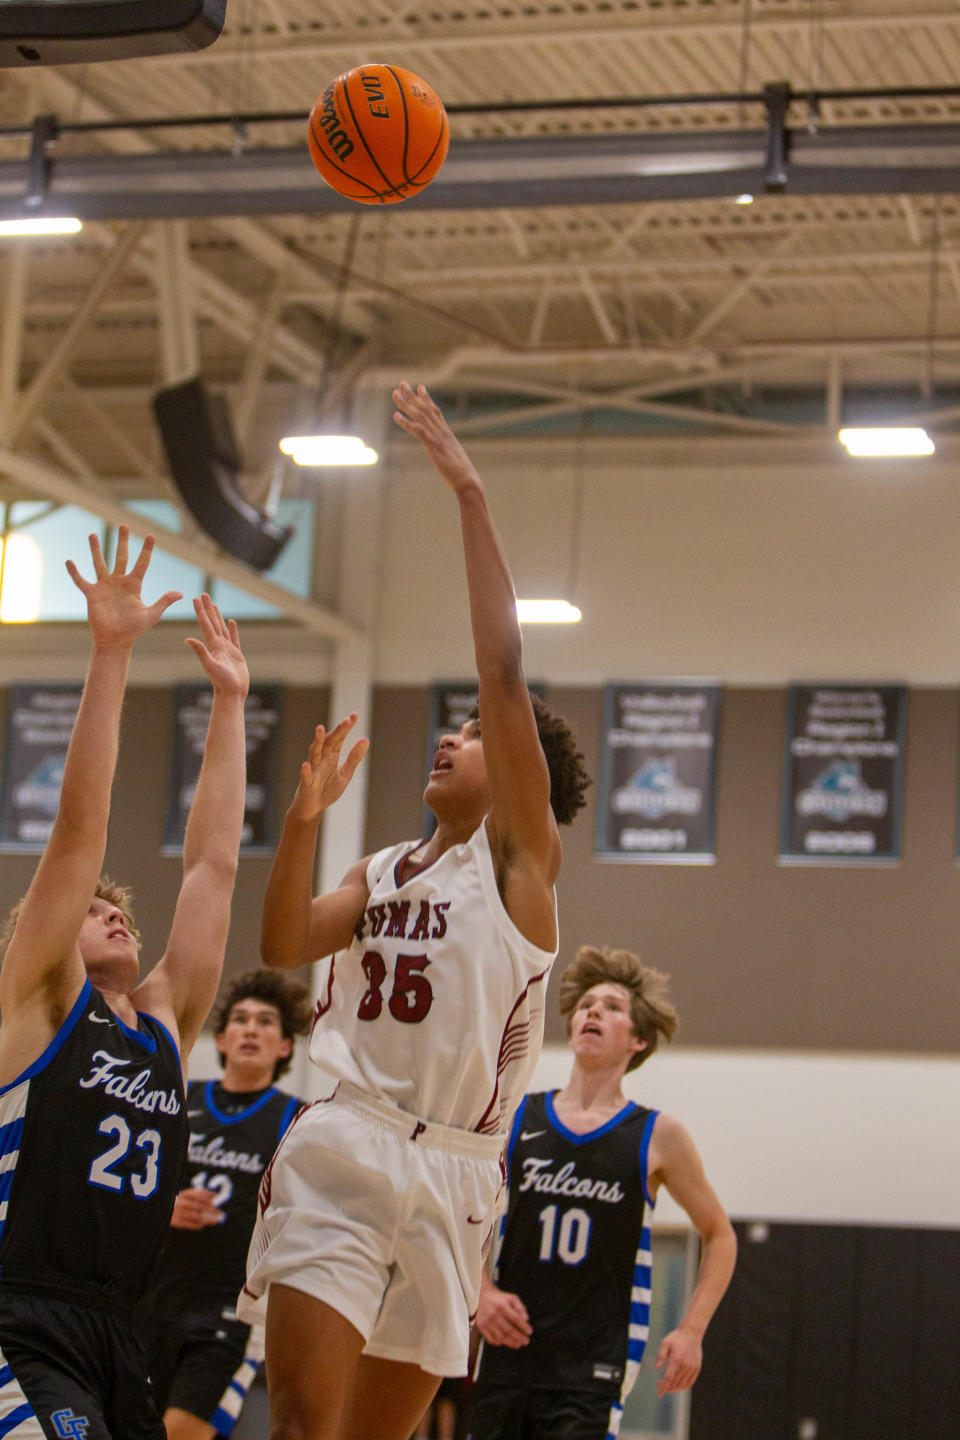 Small forward for Perry High School, Trey Mckinney (35), shoots a layup at the LV8 Invitational at Chandler-Gilbert Community College gym in Chandler, Arizona on Nov. 22, 2023.